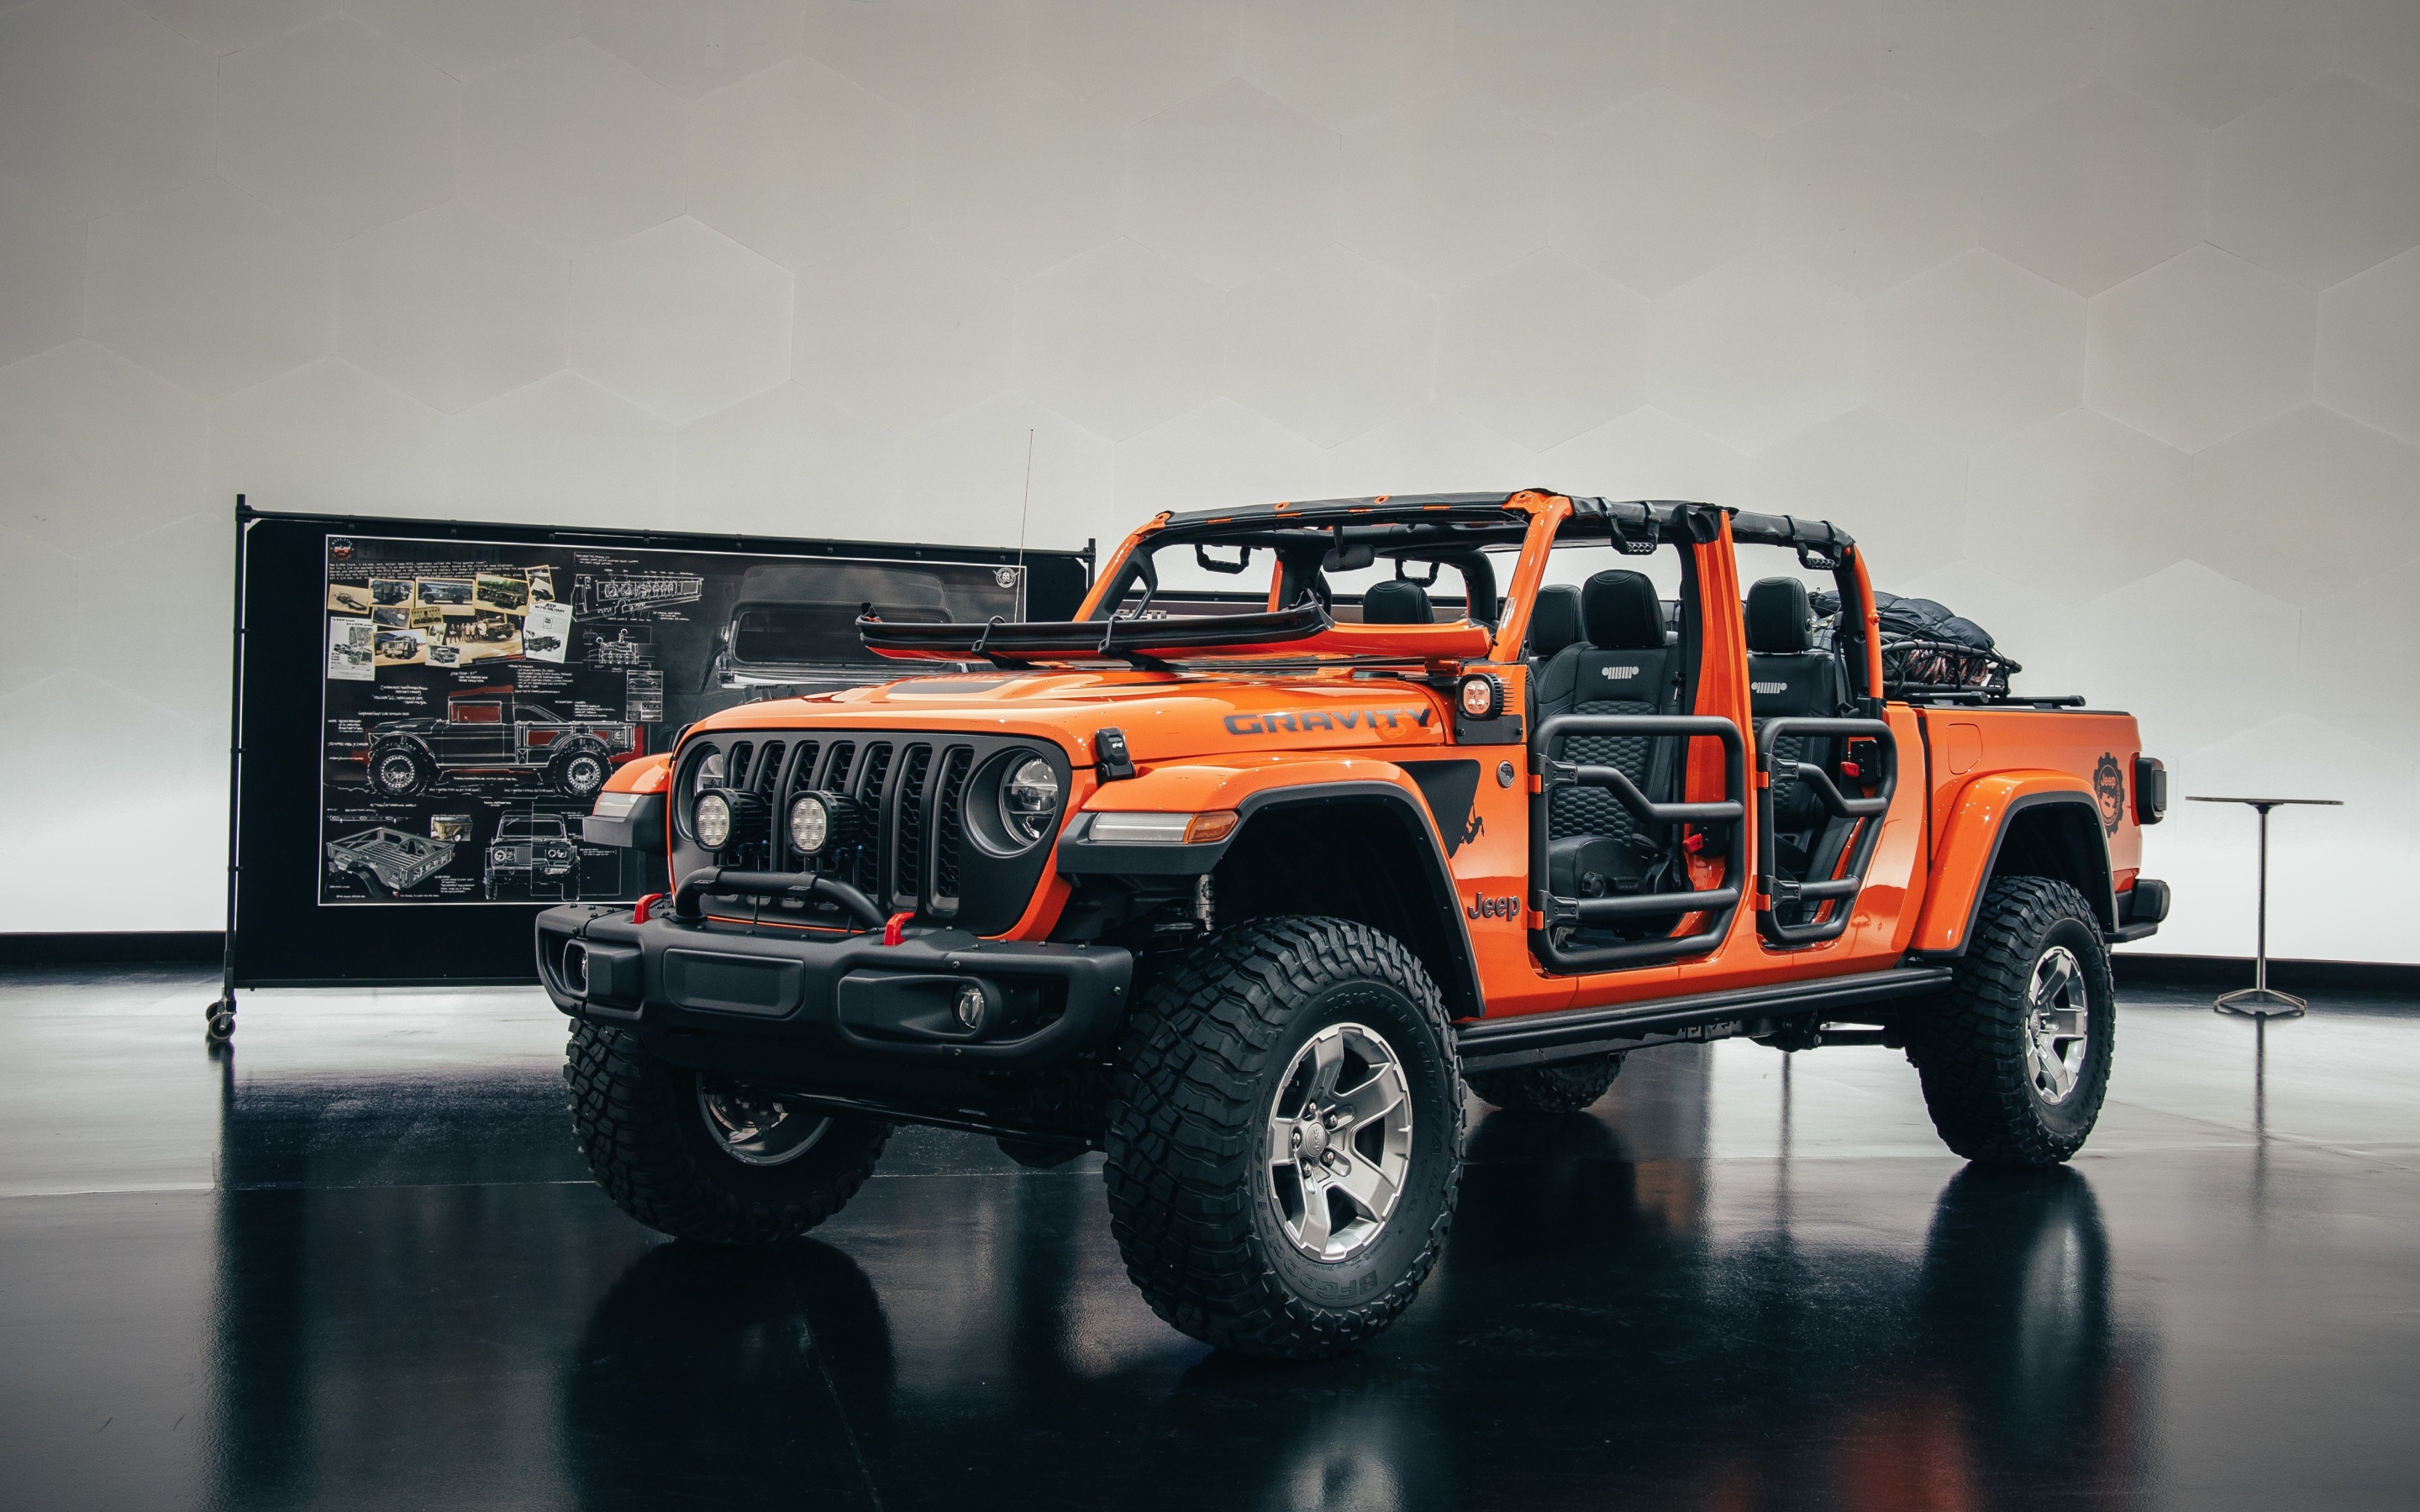 2880x1800 Jeep Gladiator Gravity Macbook Pro Retina Wallpaper Hd Cars 4k Wallpapers Images Photos And Background Wallpapers Den